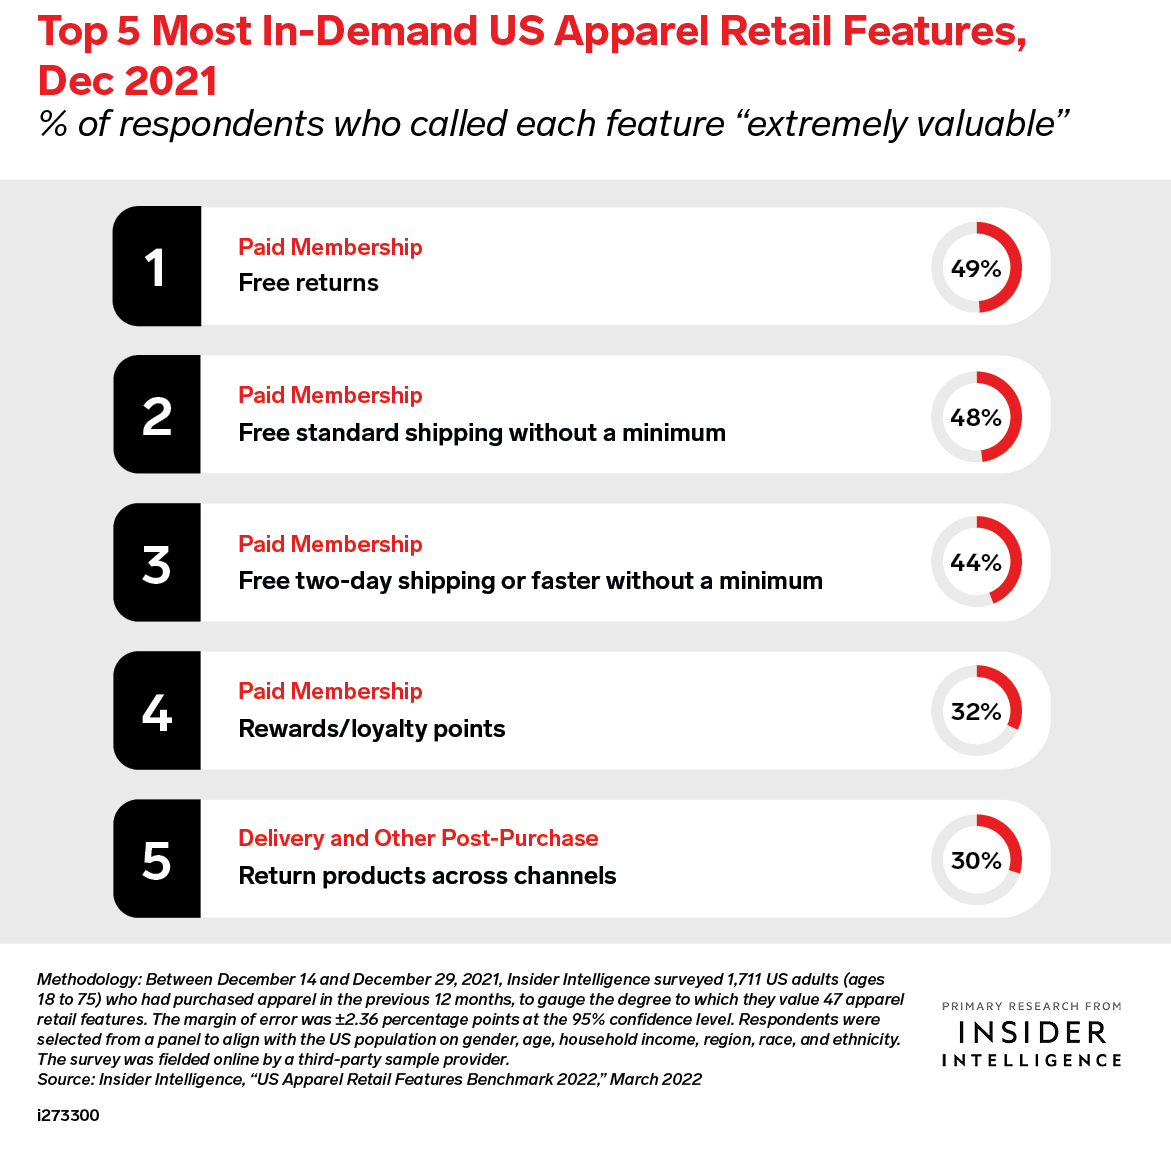 Top 5 Most In-Demand US Apparel Retail Features, March 2022 (% of respondents who called each feature 